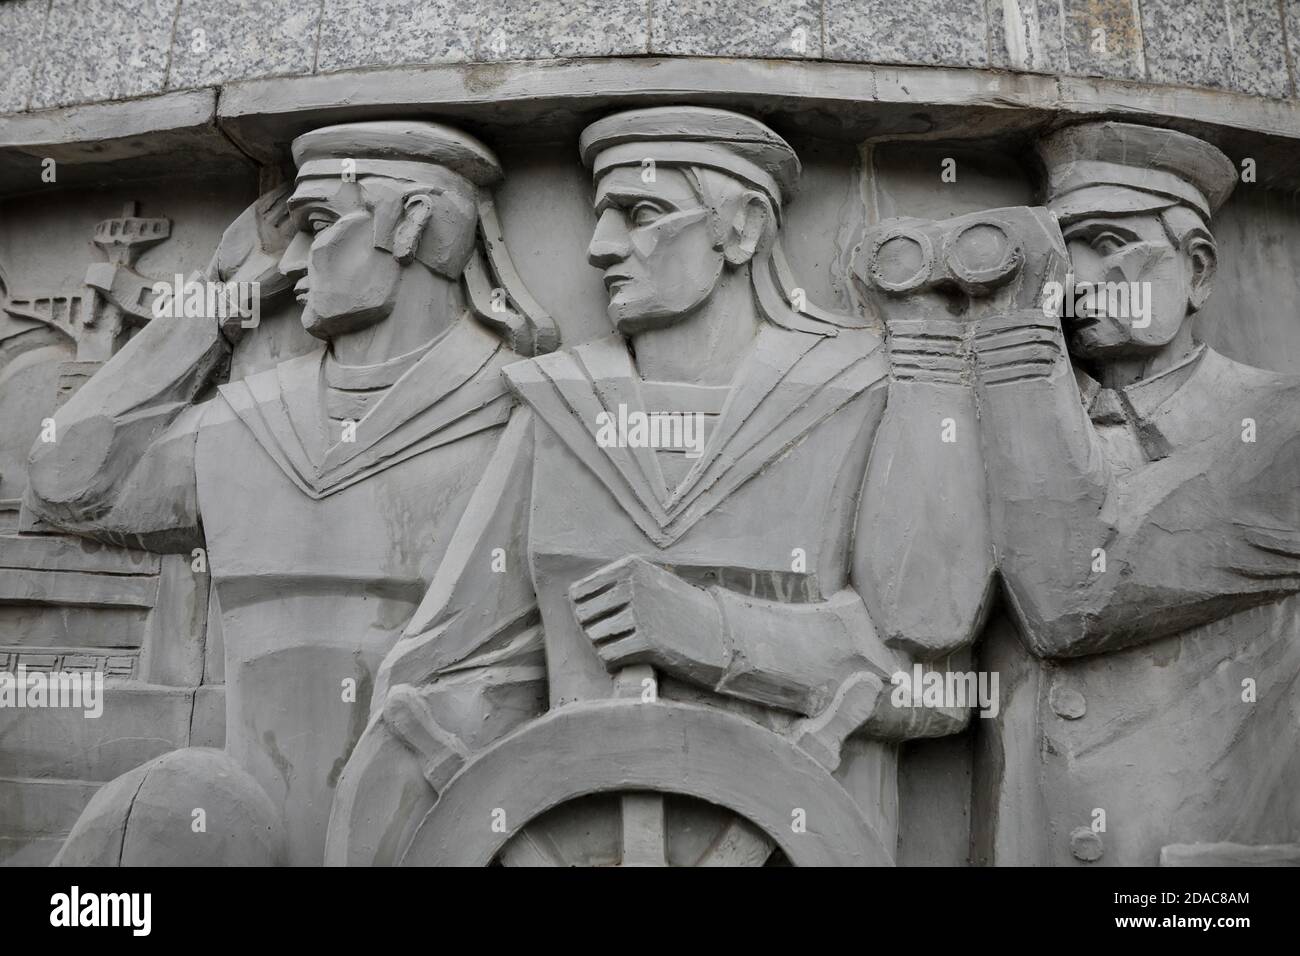 Bucharest, Romania - November 11, 2020: Details from a war memorial monument depicting Romanian soldiers. Stock Photo